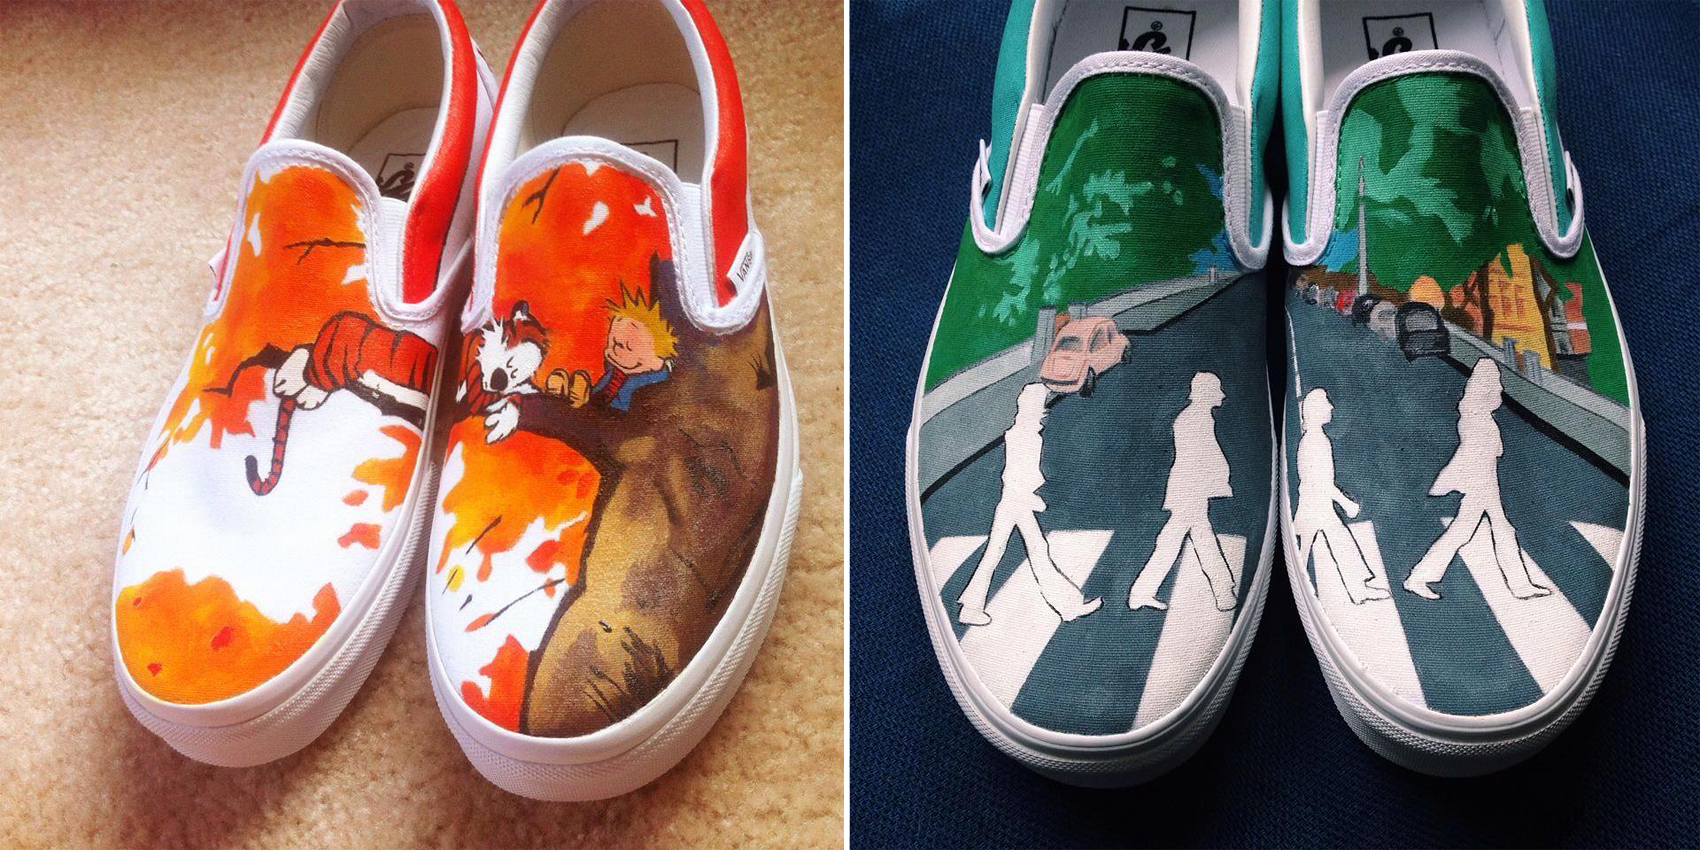 Artist Hand-Paints Shoes With Calvin And Hobbes, Pink Floyd, And Other